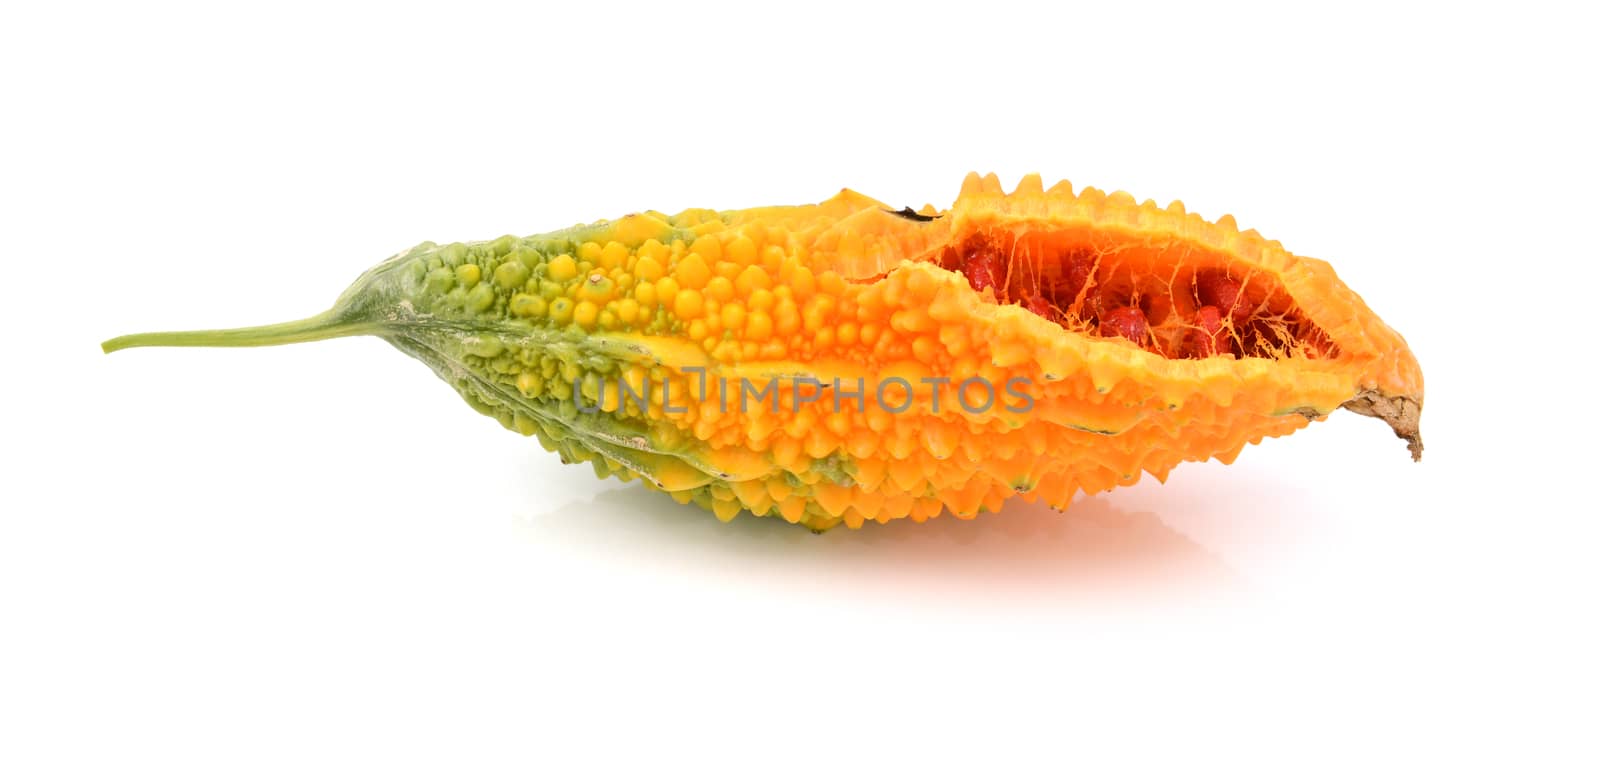 Overripe bitter gourd, with orange warty flesh, splitting open to reveal red seeds, isolated on a white background